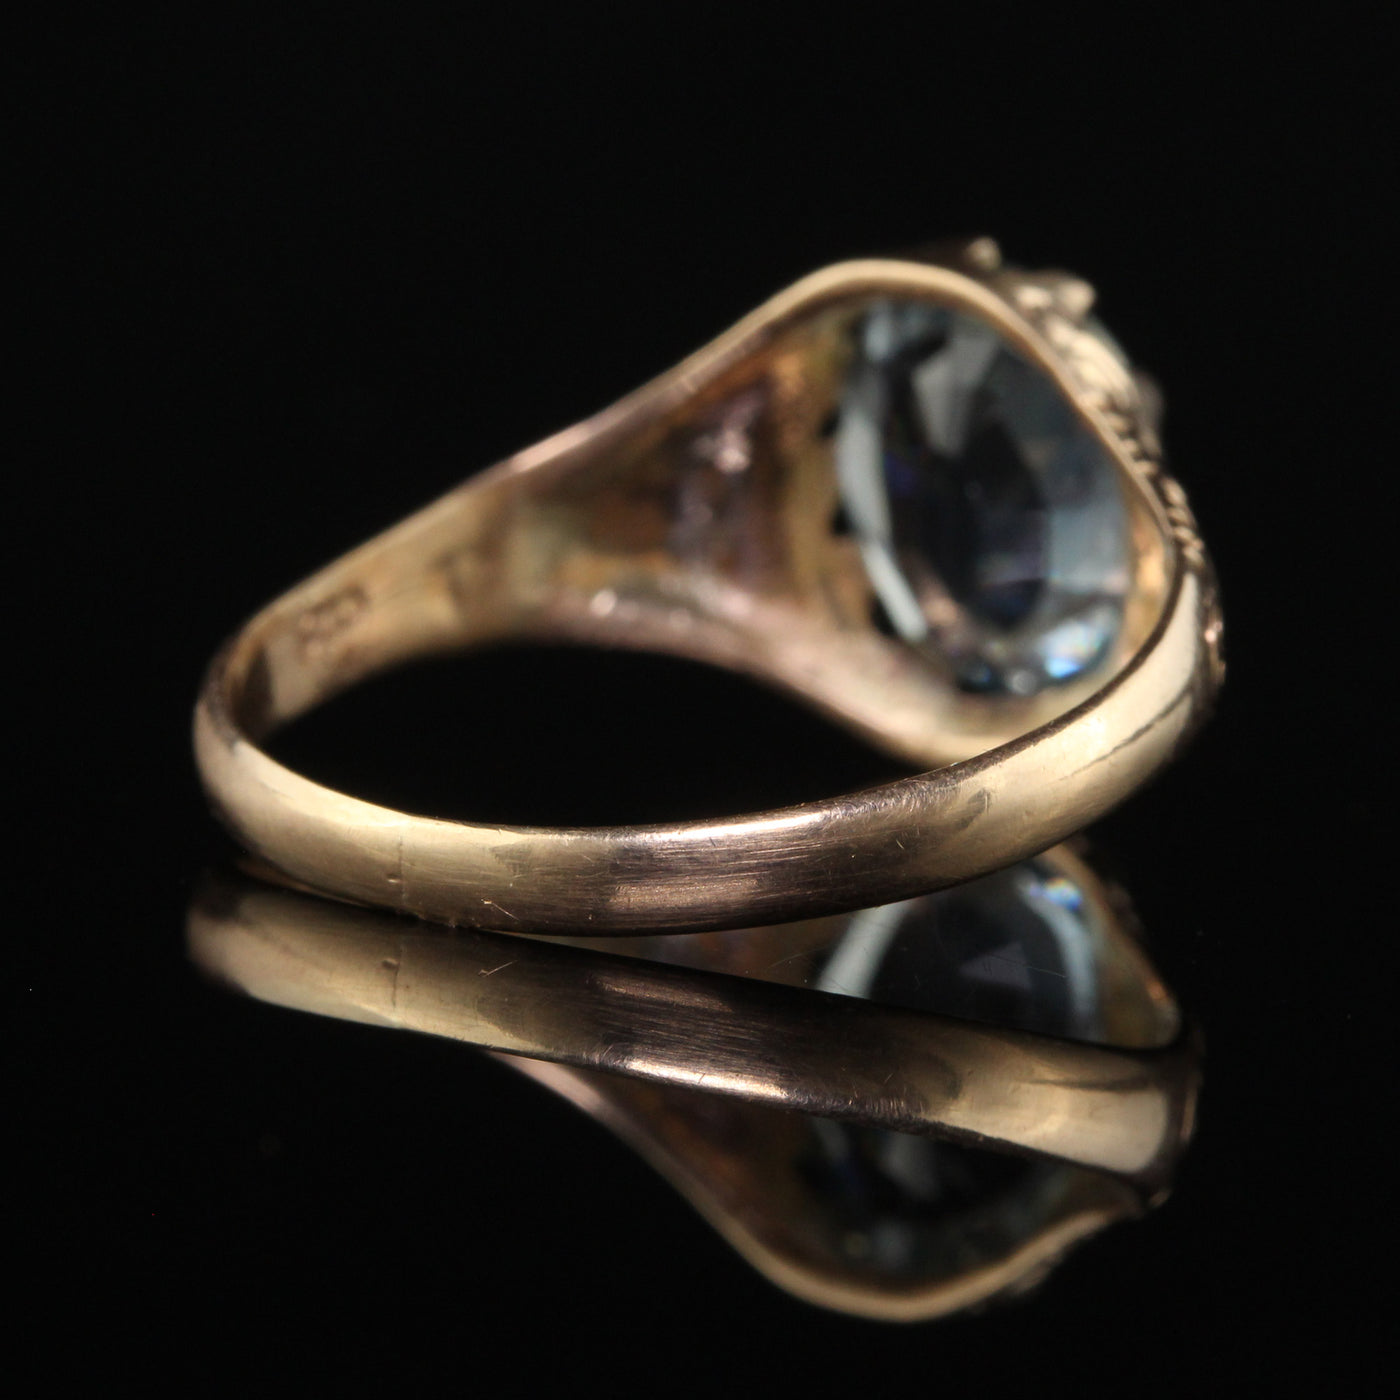 Antique Victorian 10K Yellow Gold Natural Unheated Sapphire Engagement Ring